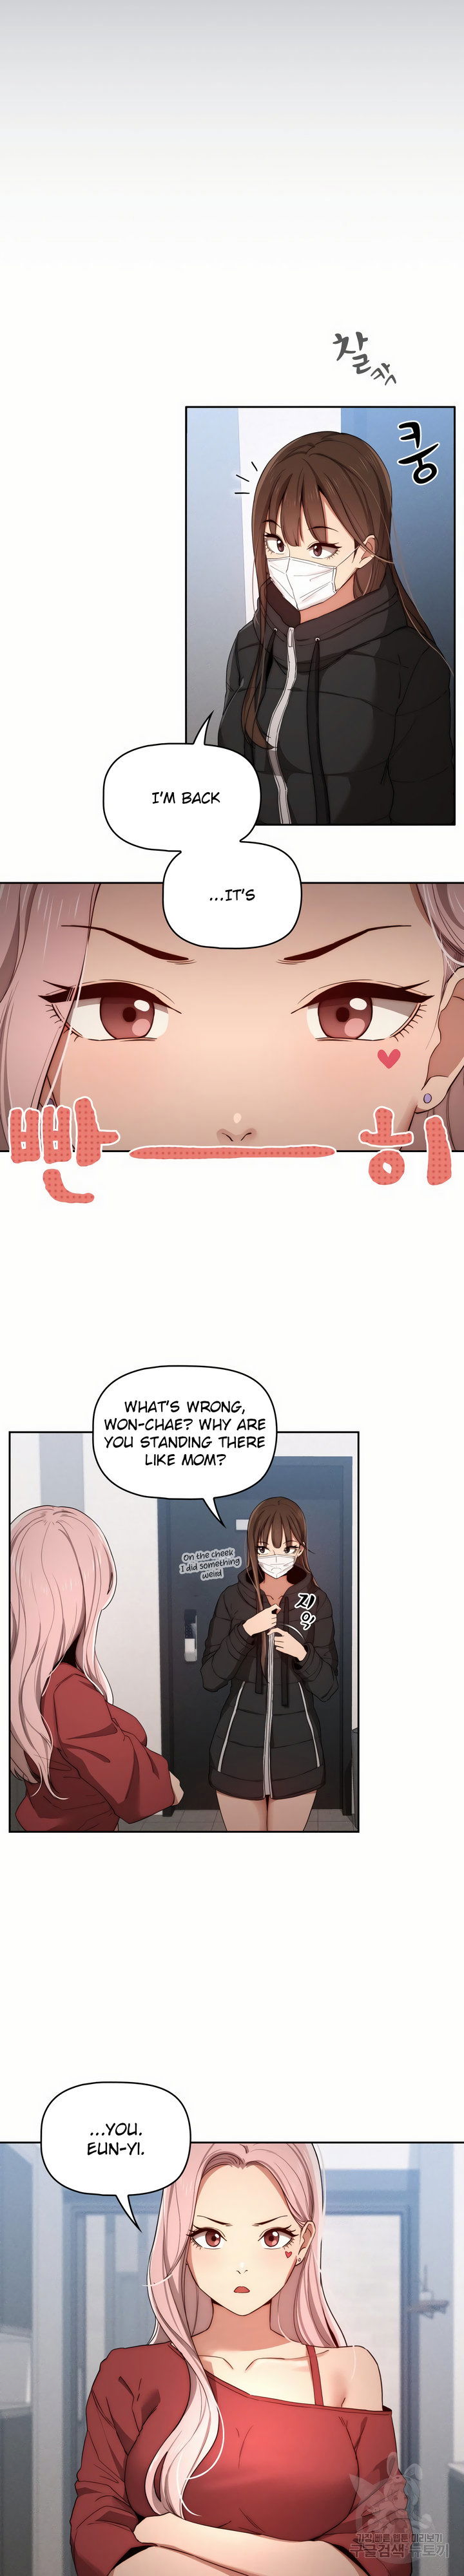 private-tutoring-in-these-trying-times-chap-33-18